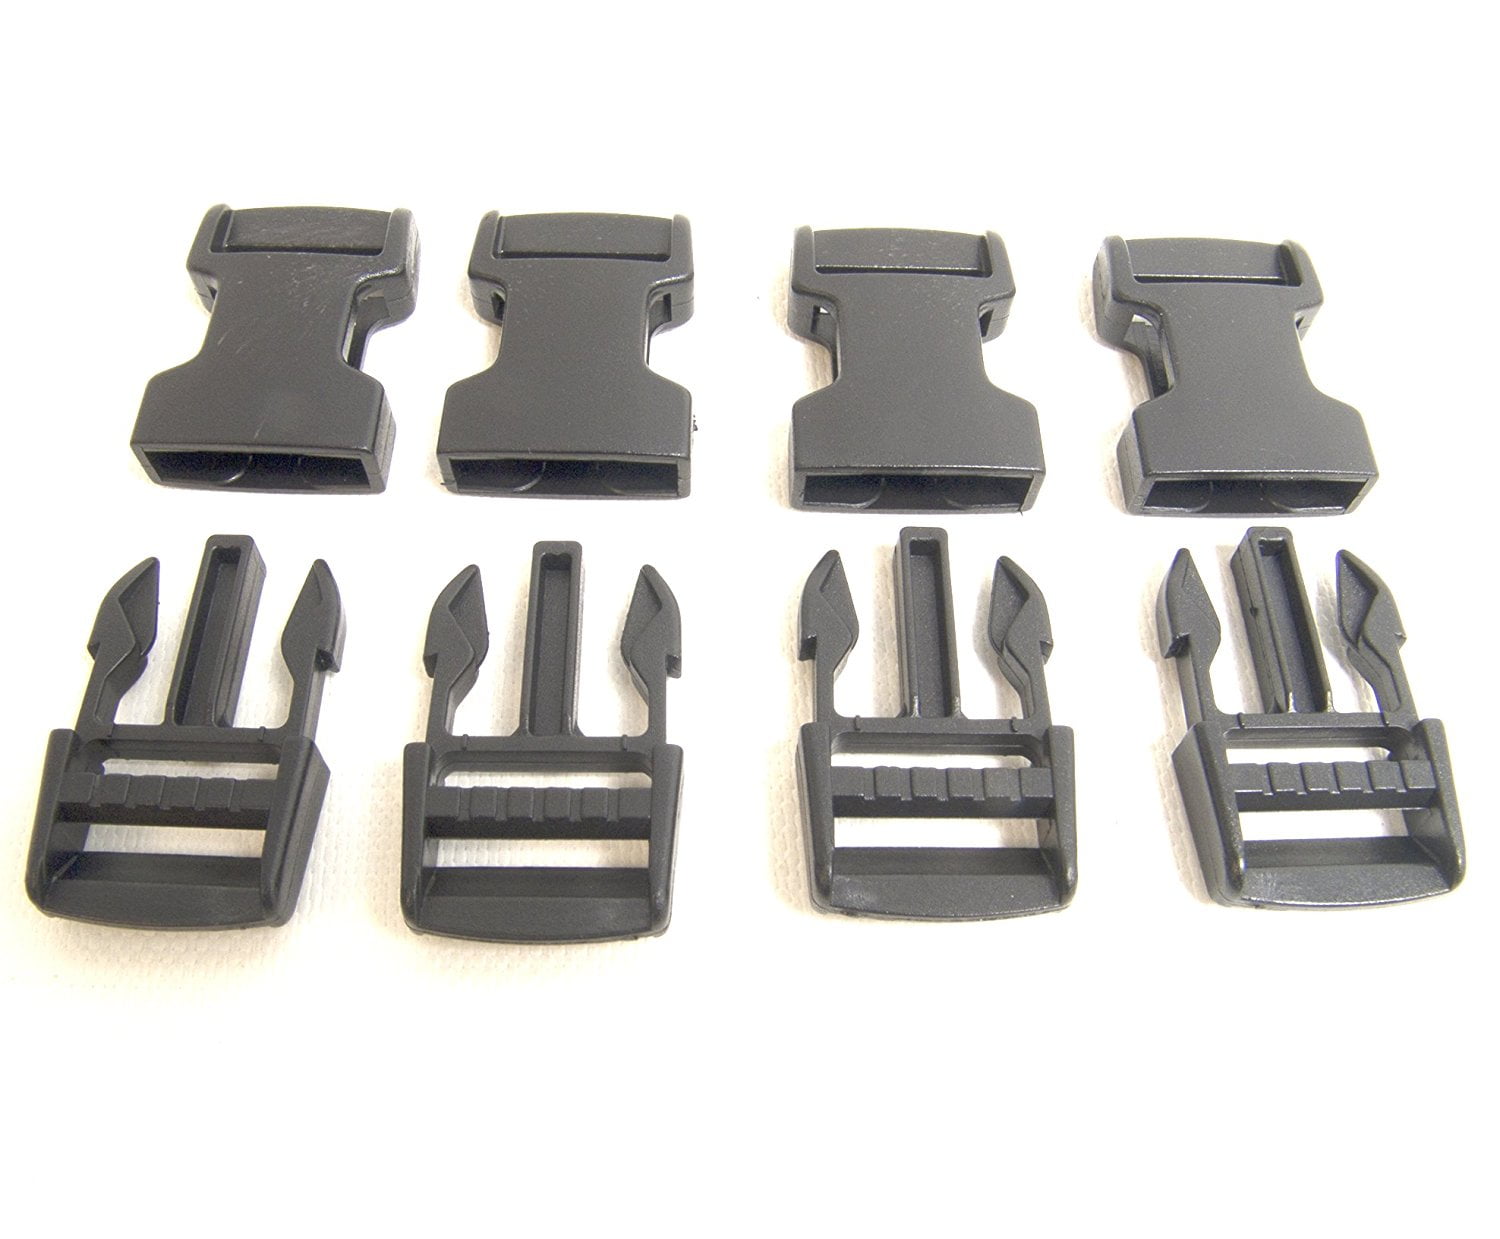 Side Release Buckles Clip 2 x 20mm for webbing Plastic Quick Release Buckles 